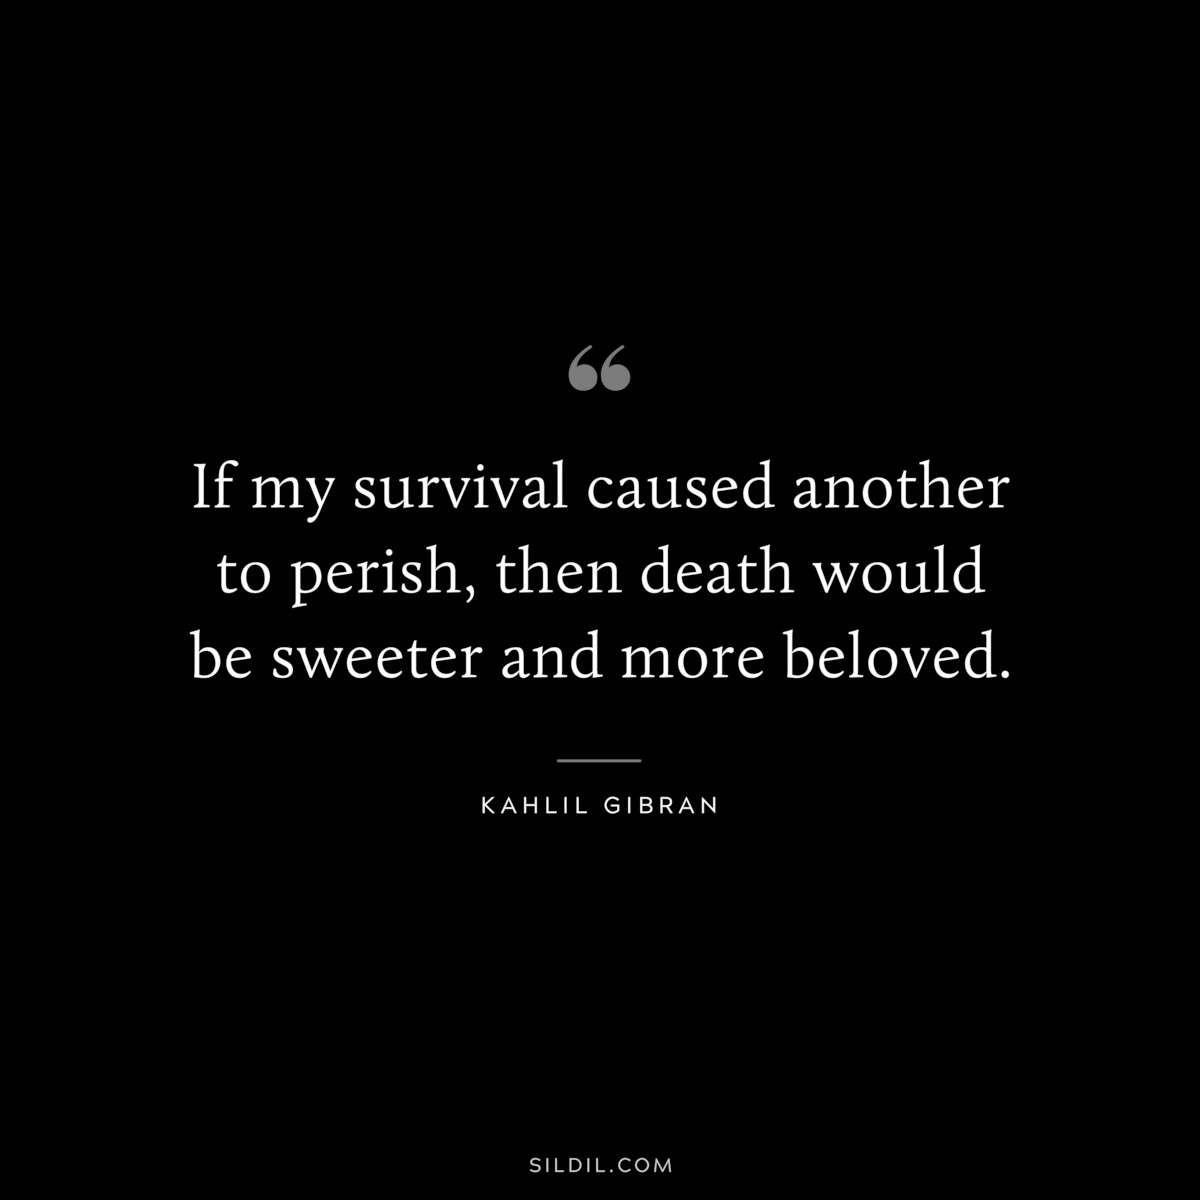 If my survival caused another to perish, then death would be sweeter and more beloved. ― Kahlil Gibran